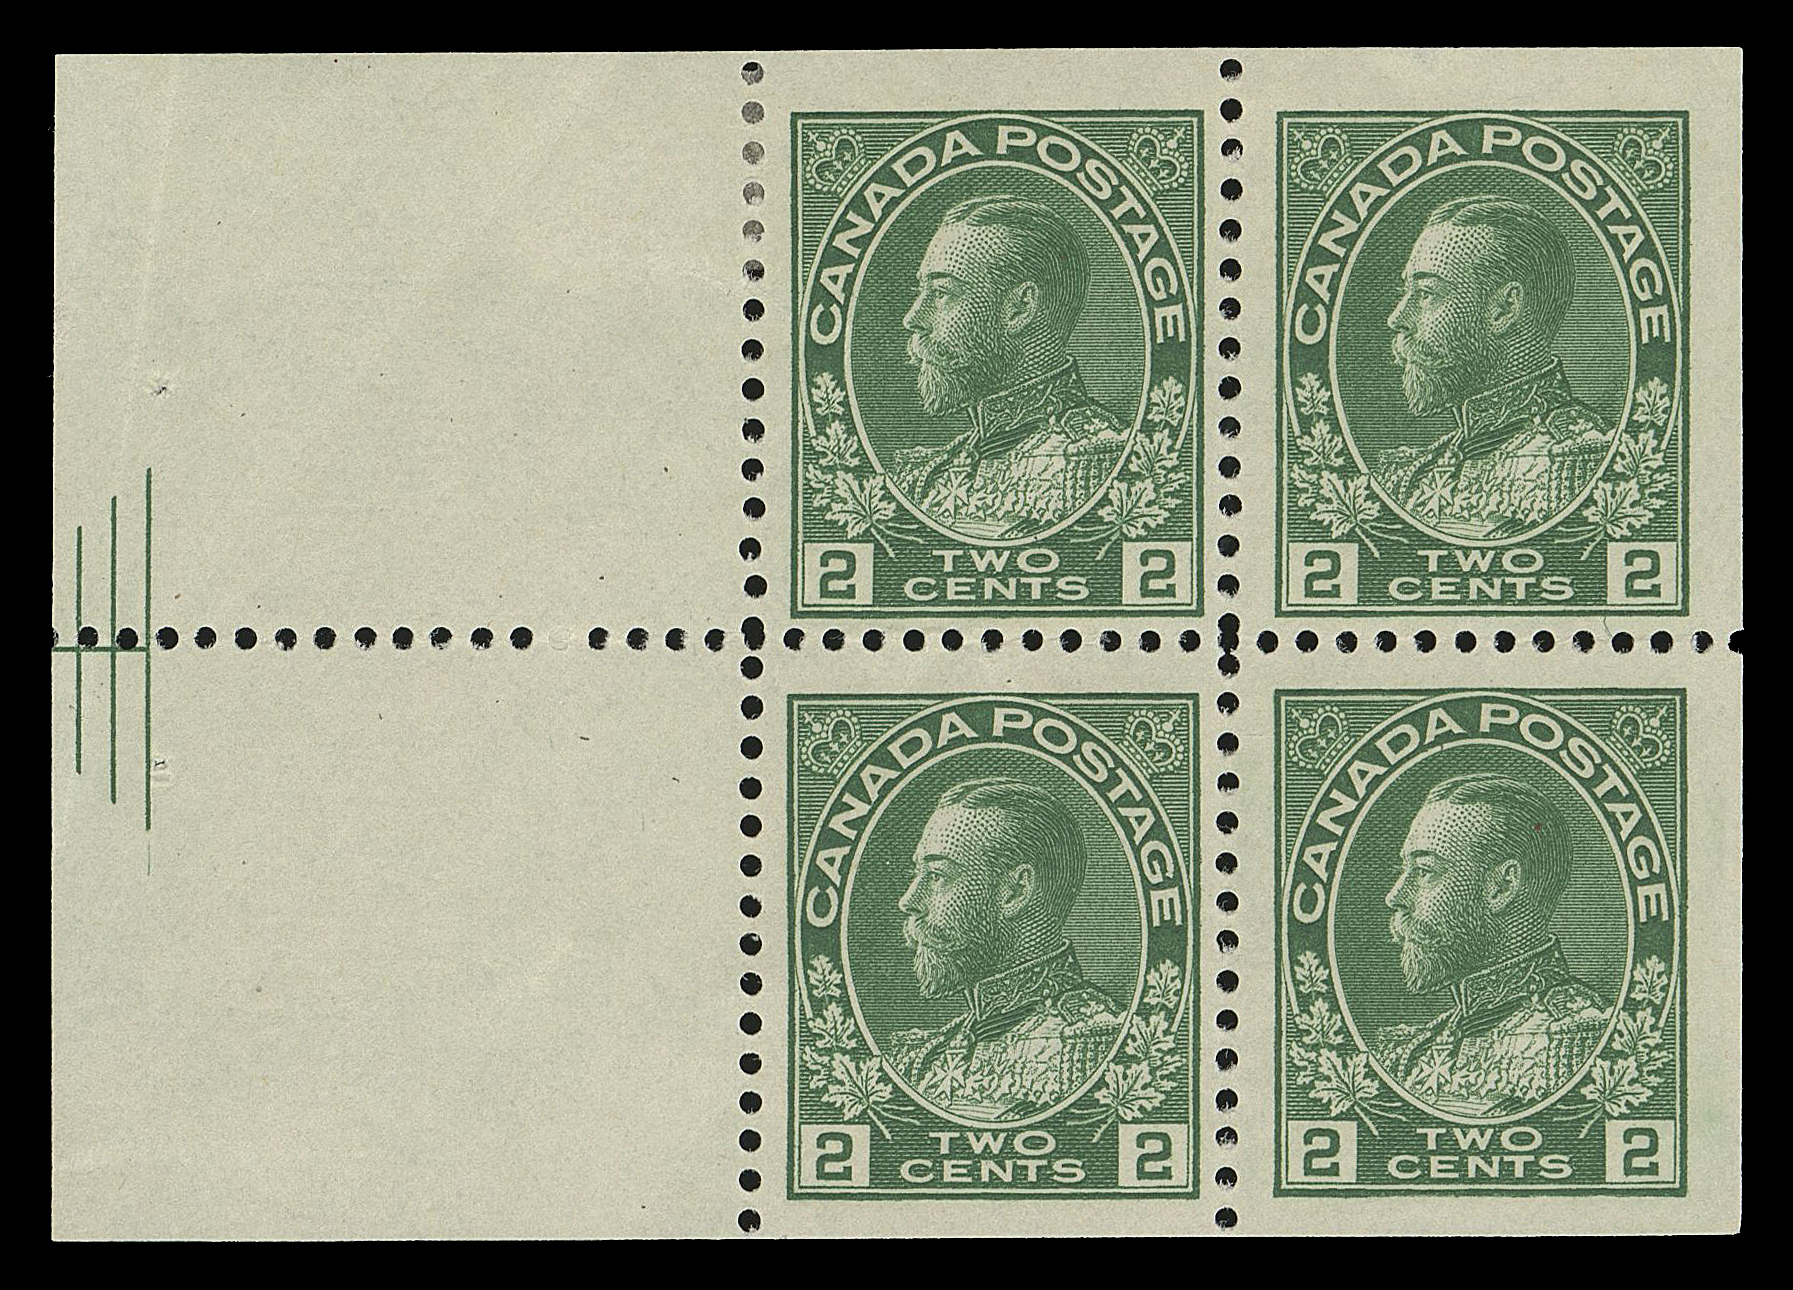 ADMIRAL STAMPS  107bi,A nicely centered, fresh mint booklet pane of four displaying a very sharp impression of the three-line Pyramid Guideline in tab margin, hinged on top left stamp, light crease in tab margin, VF appearance (Unitrade cat. $4,200)

Provenance: Michael Madesker booklet pane collection (private sale)

Census: A detailed listing compiled by Leopold Beaudet and John Jamieson, published in the Admiral